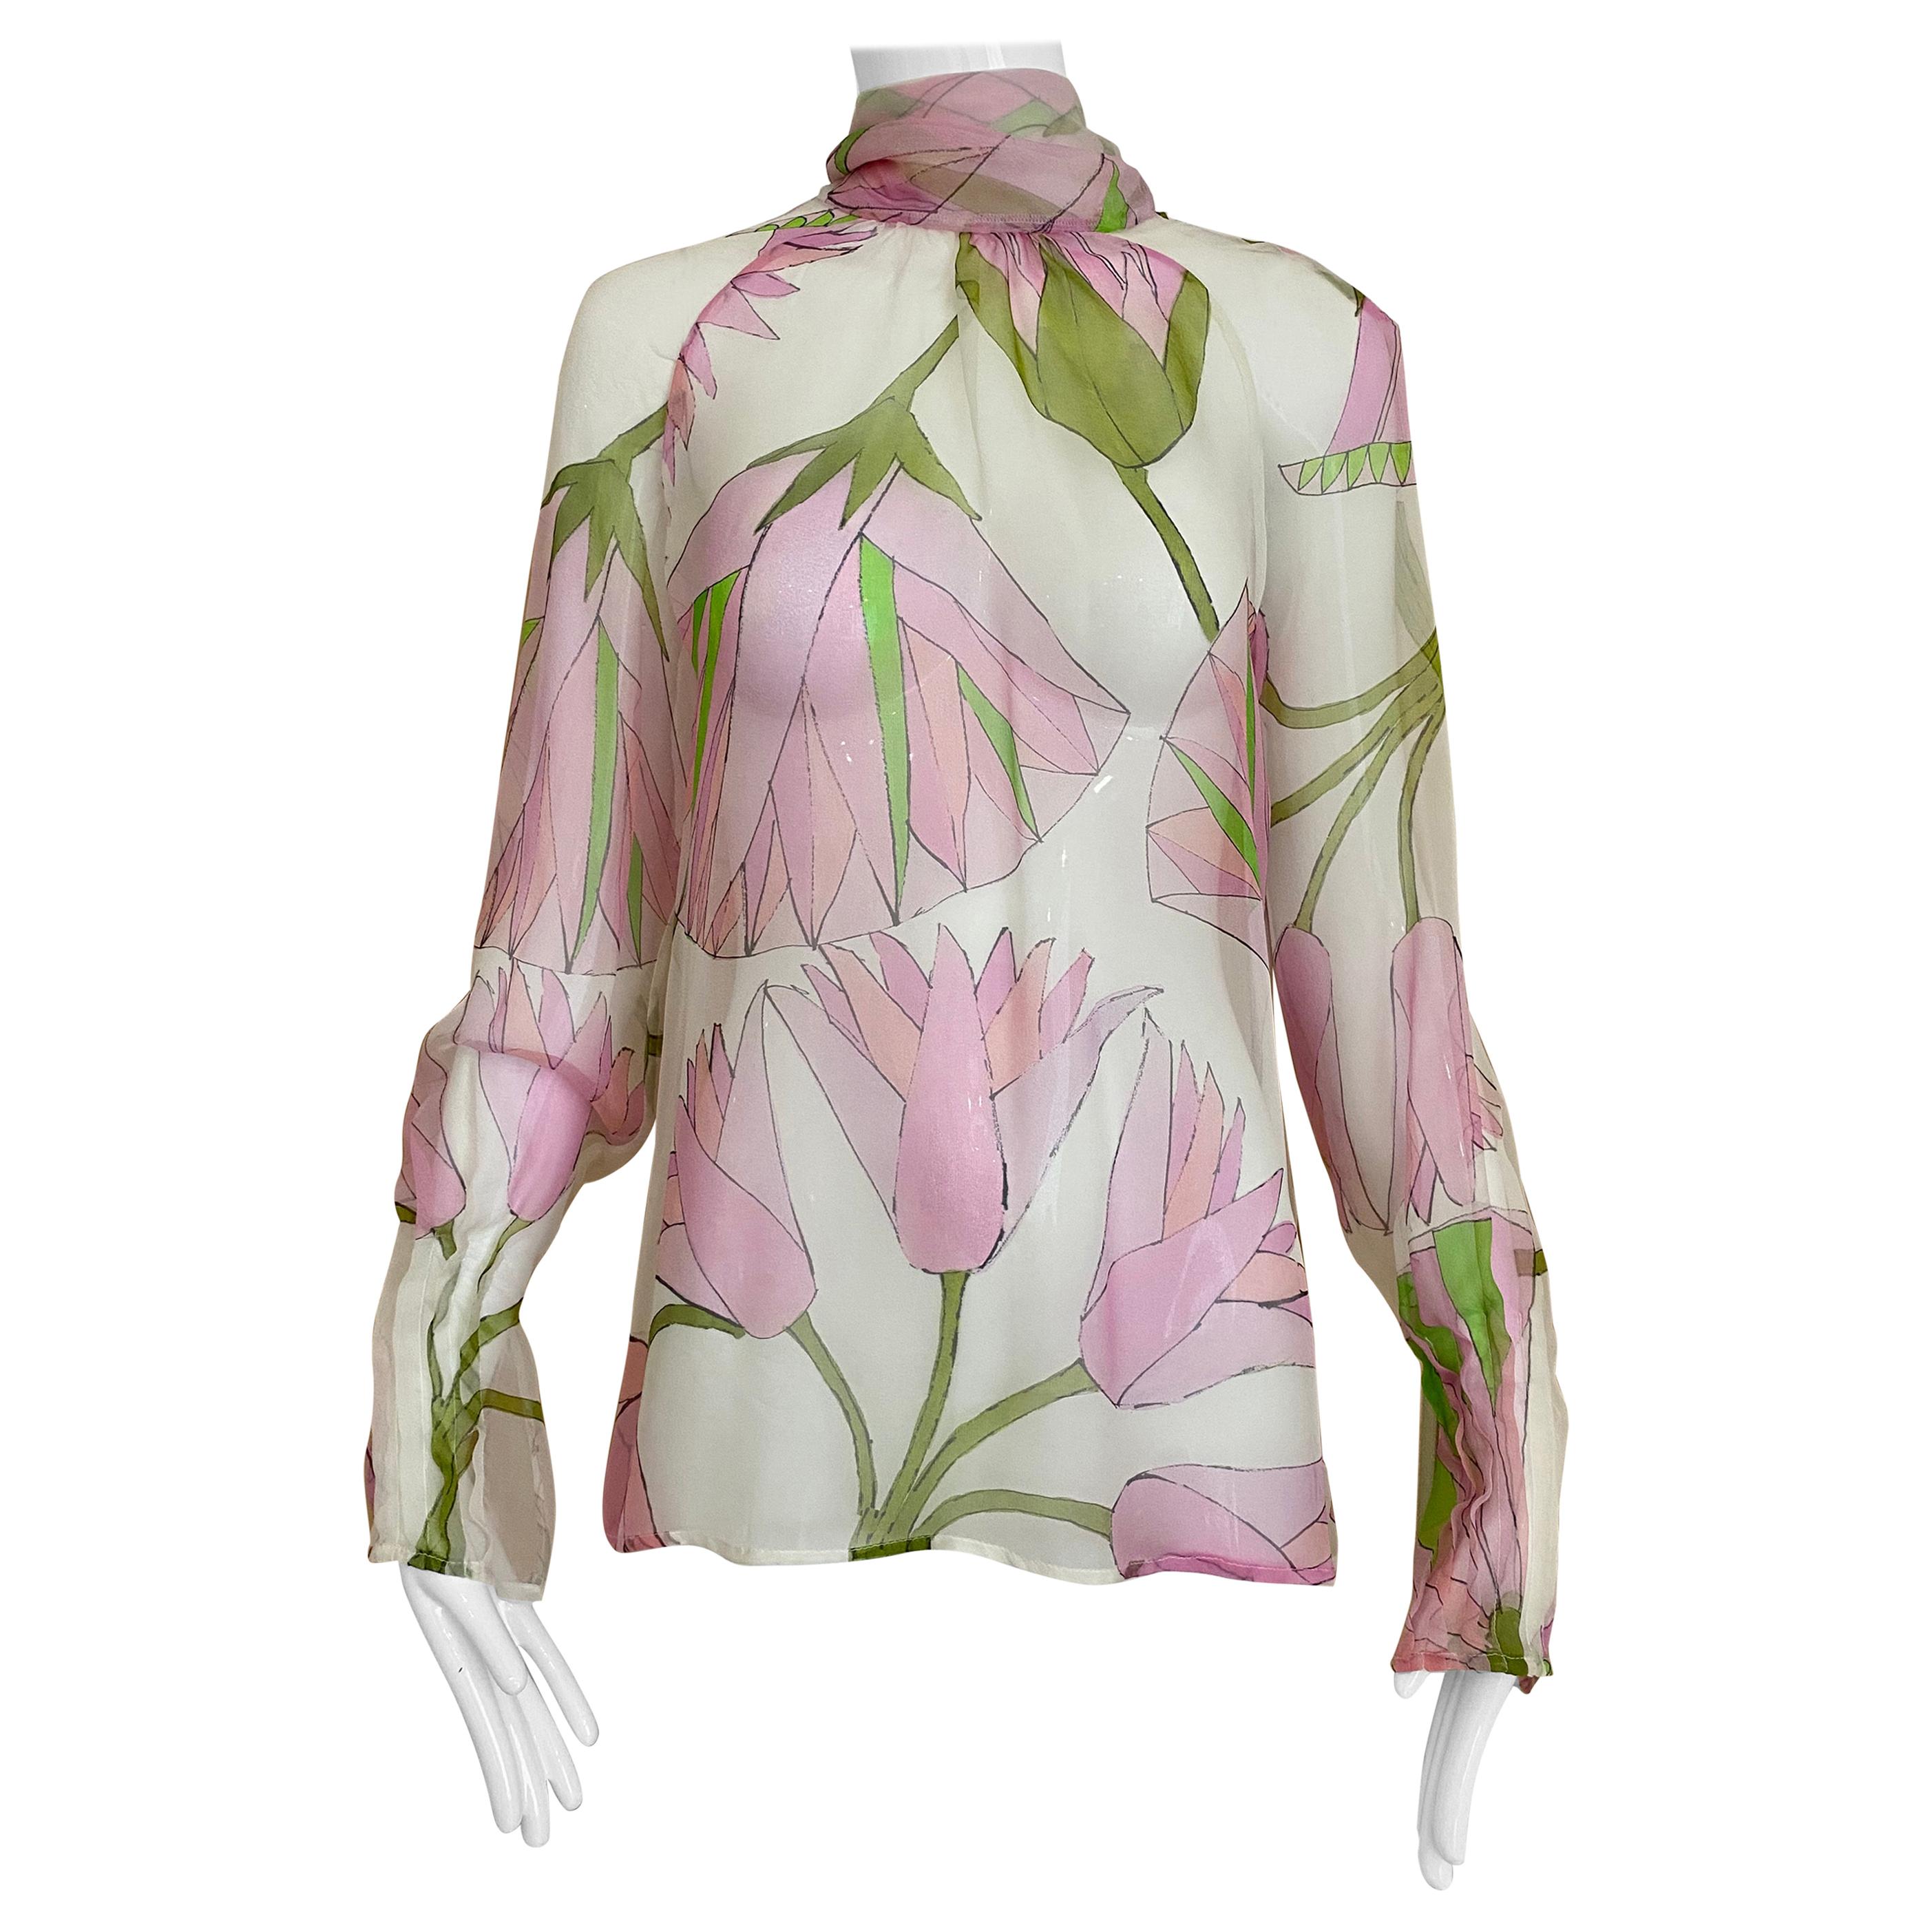 Gianfranco Ferre Pink and White Floral Print Silk Blouse 